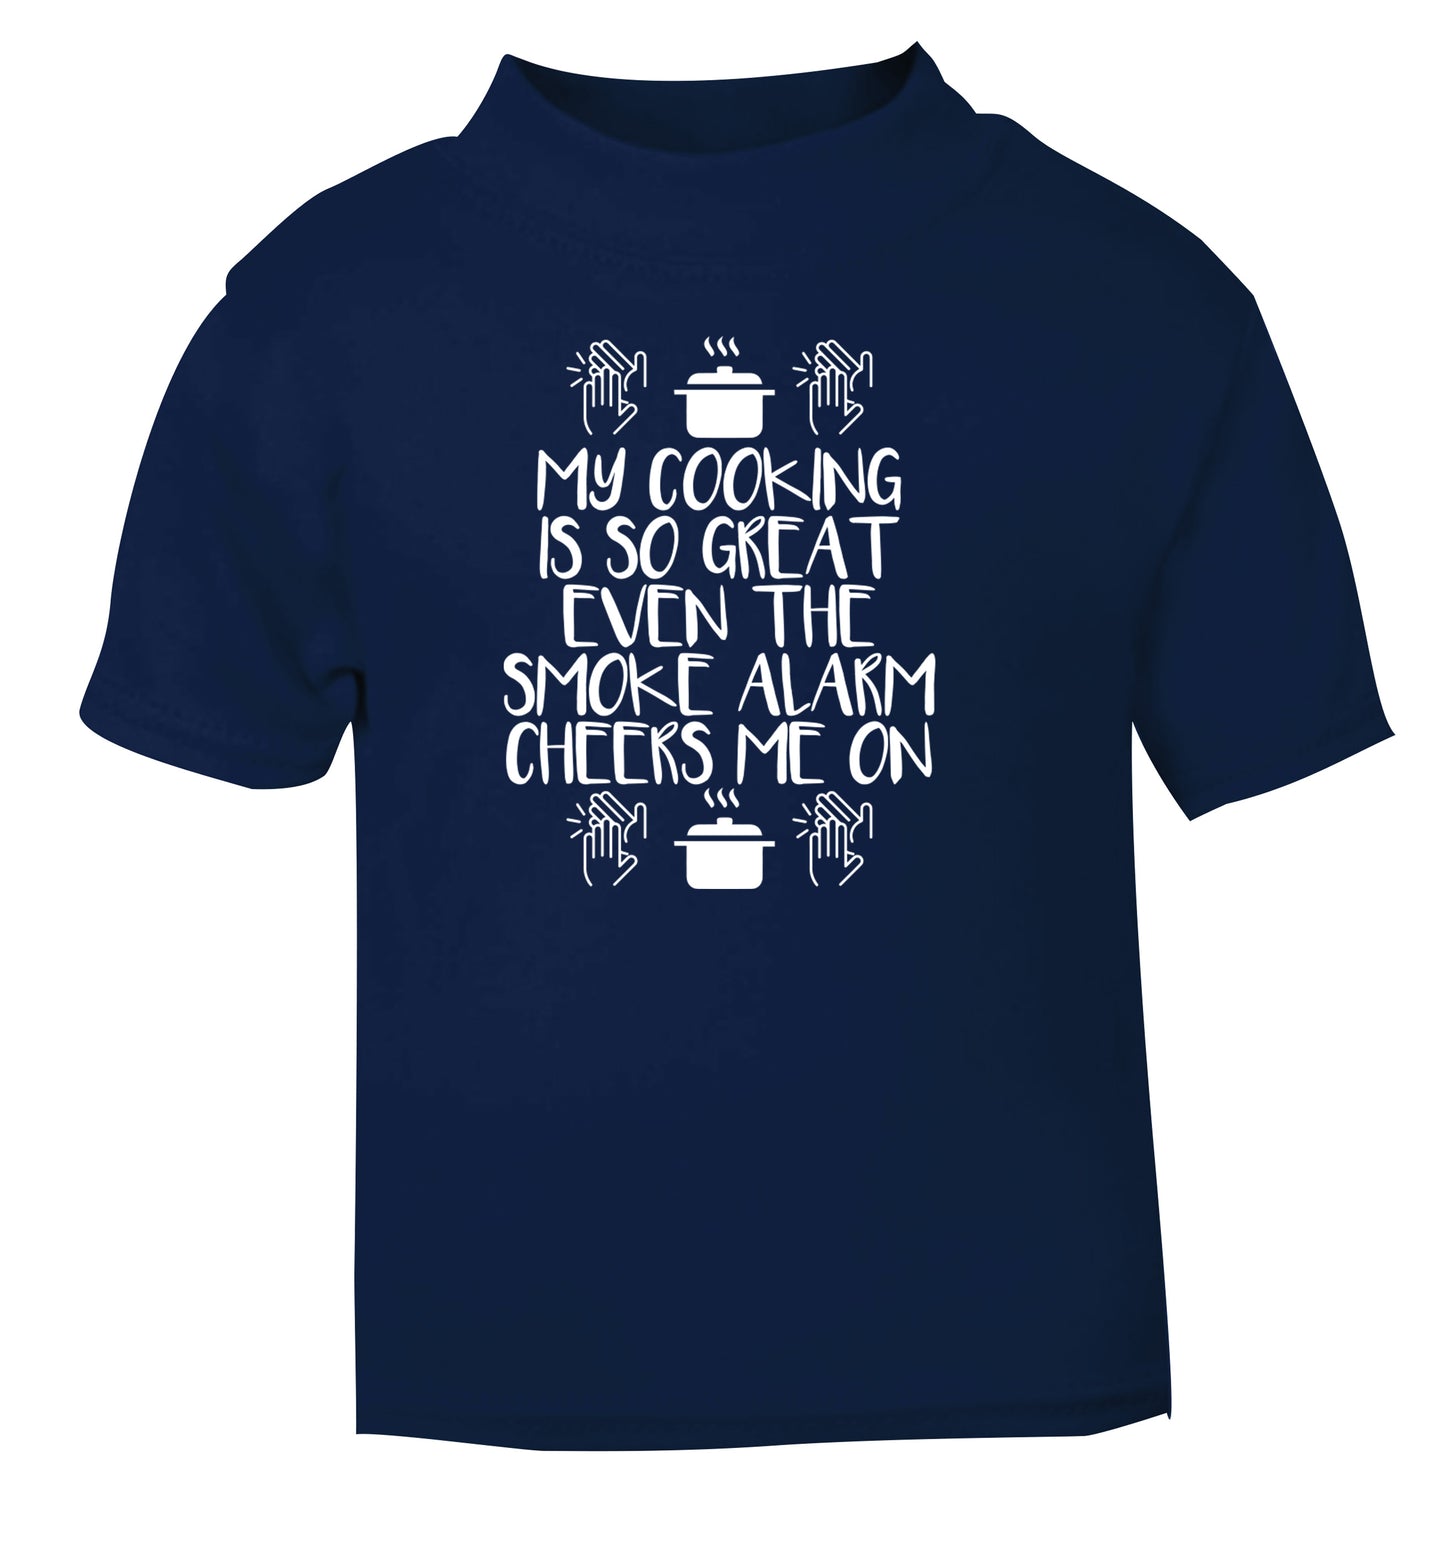 My cooking is so great even the smoke alarm cheers me on! navy Baby Toddler Tshirt 2 Years